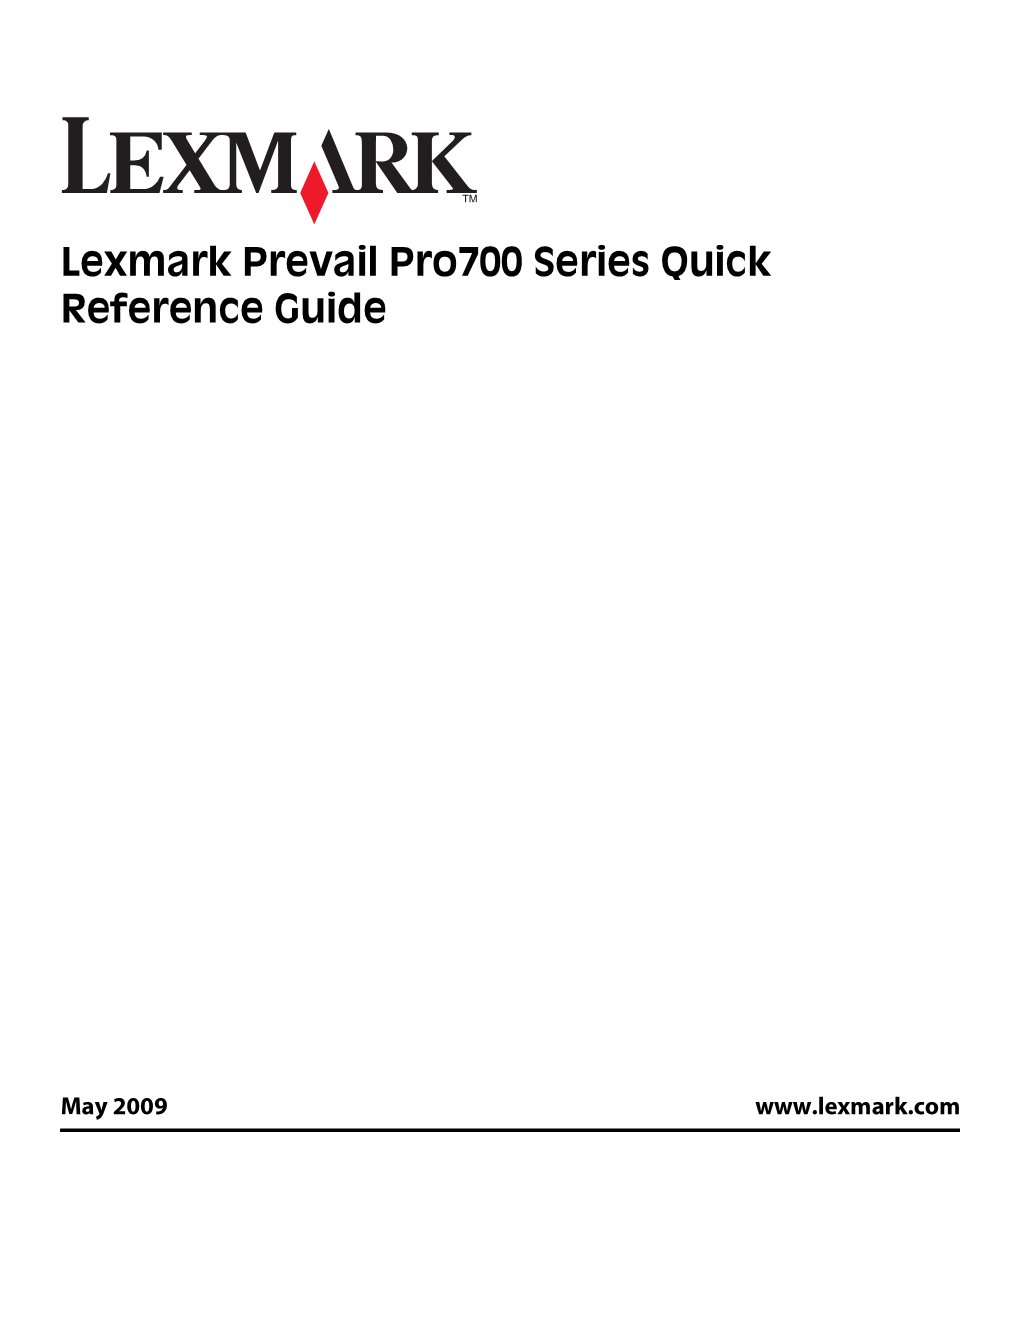 Lexmark Prevail Pro700 Series Quick Reference Guide